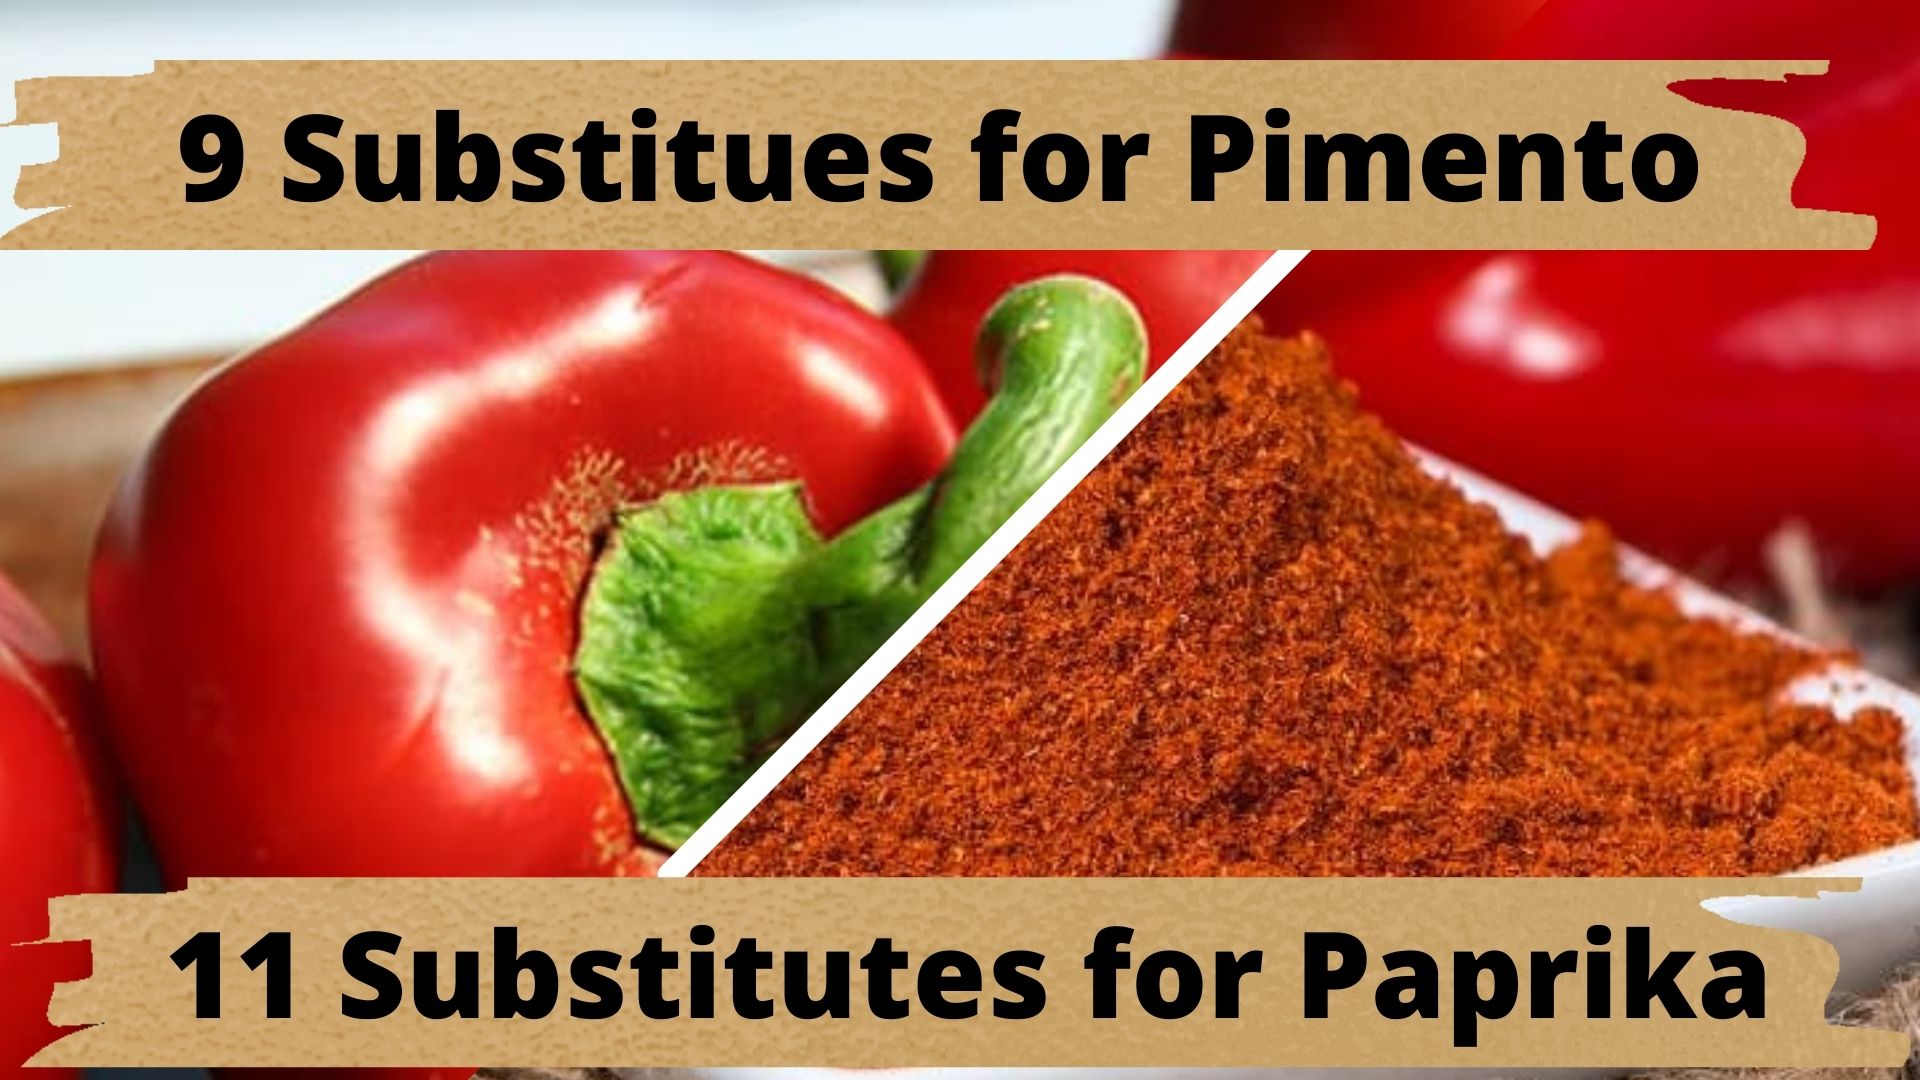 Substitute for pimento